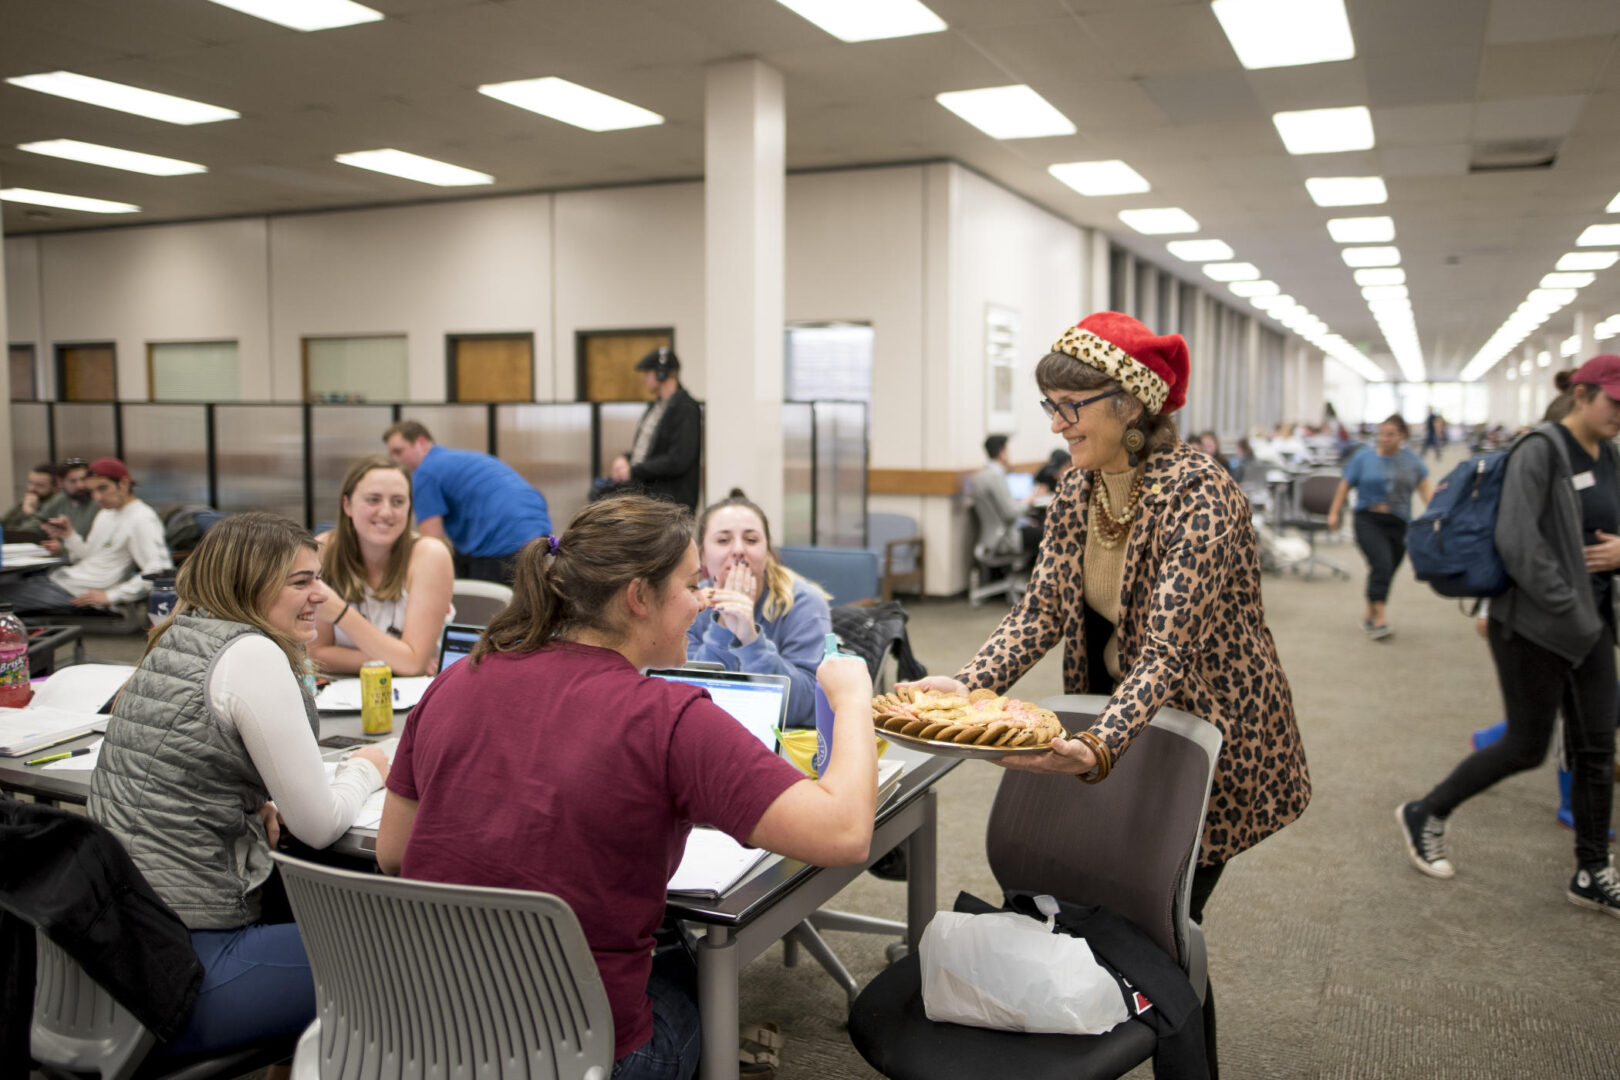 President Hutchinson, dressed in a leopard-print jacket and Santa Hat, delivers cookies to students in the library during finals week.